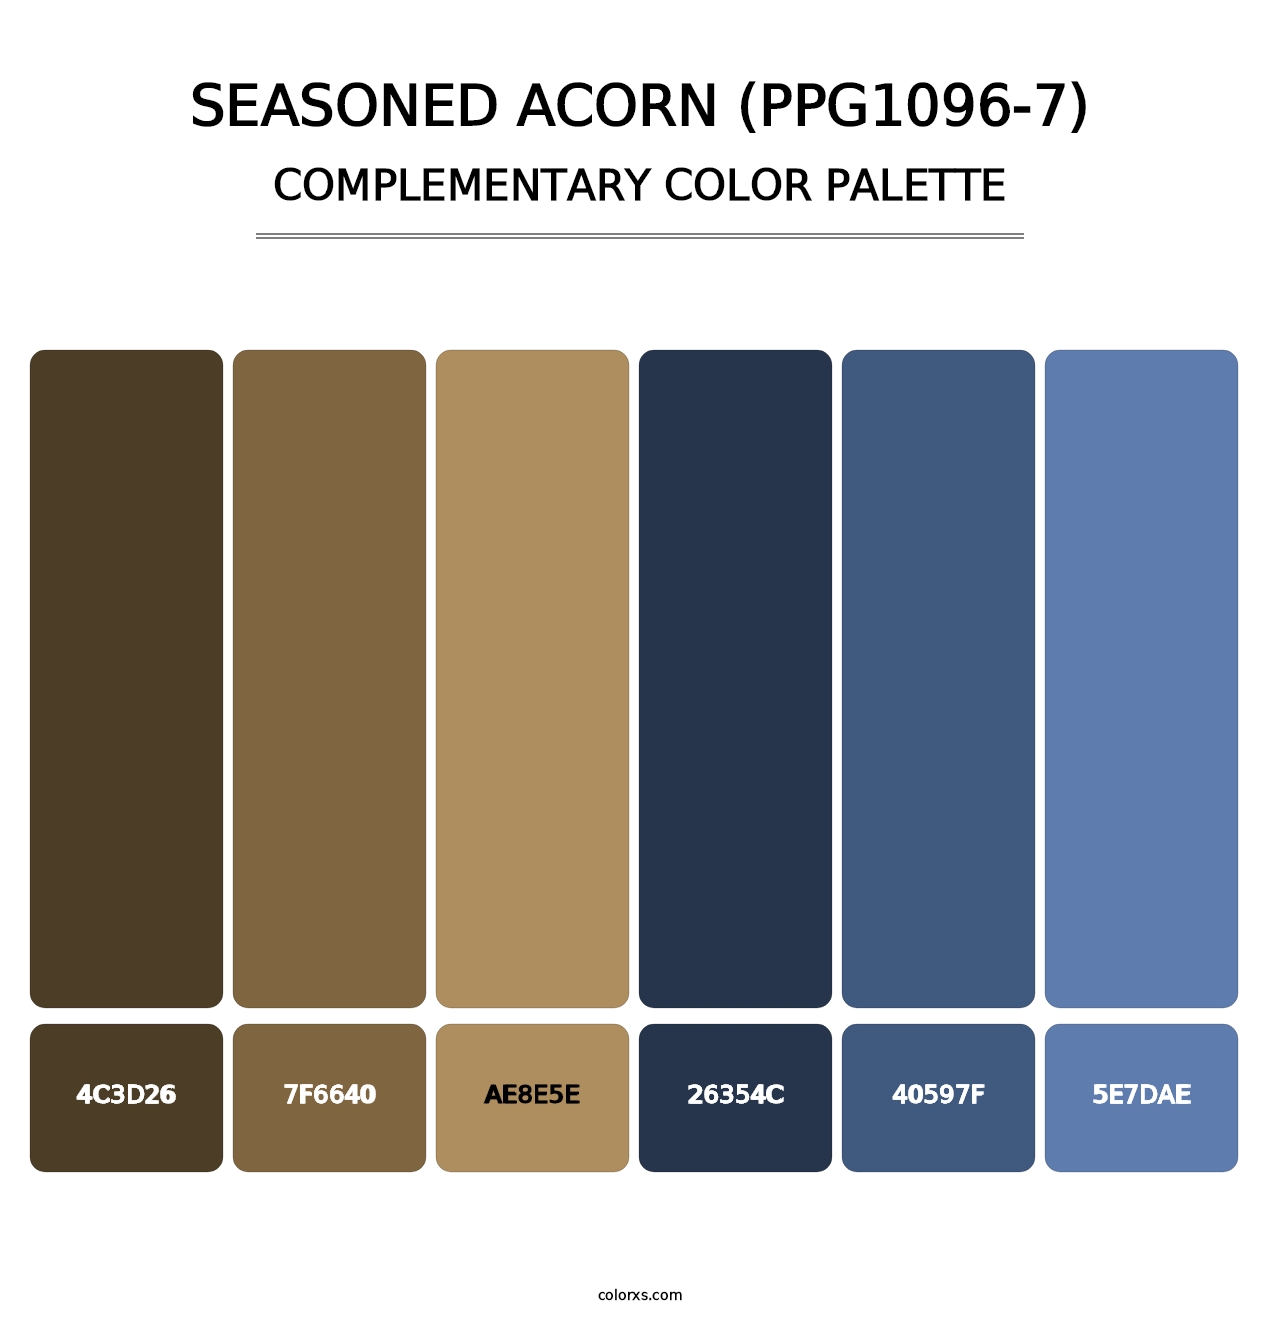 Seasoned Acorn (PPG1096-7) - Complementary Color Palette